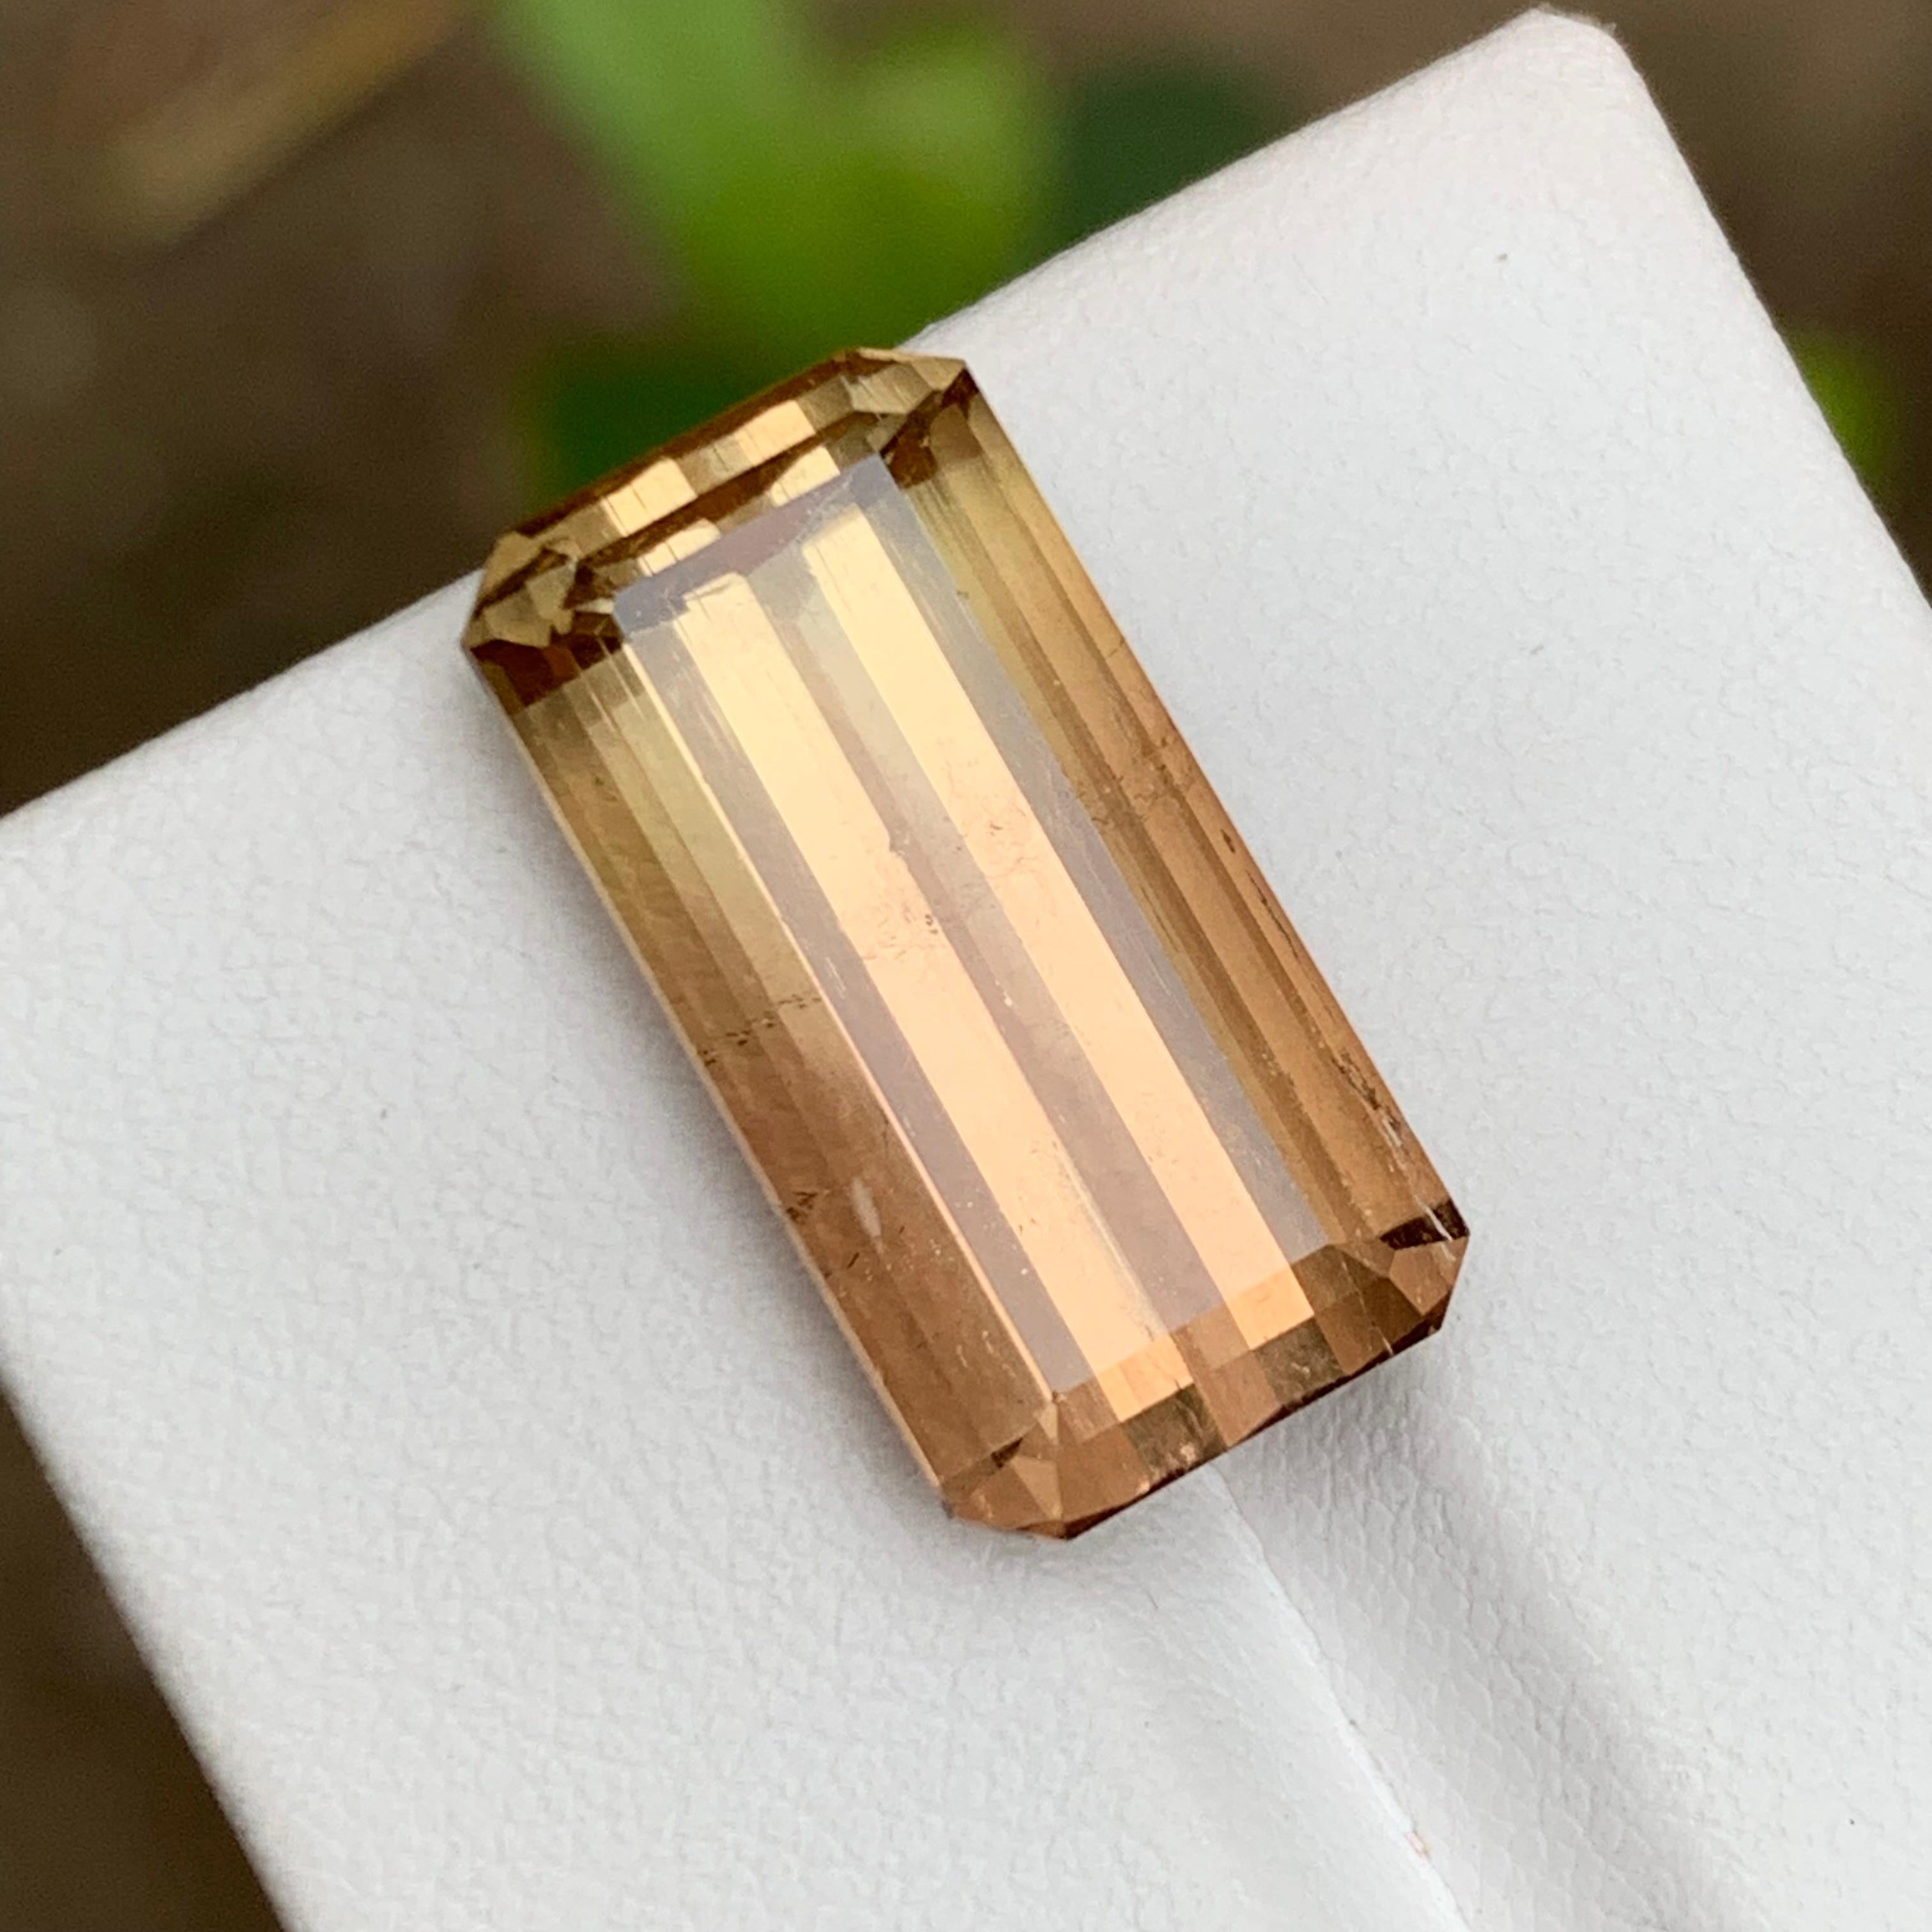 GEMSTONE TYPE: Tourmaline
PIECE(S): 1
WEIGHT: 14 Carats
SHAPE: Emerald
SIZE (MM): 19.36 x 9.95 x 8.15
COLOR: Yellowish Peach Bicolor
CLARITY: Slightly Included 
TREATMENT: Heated
ORIGIN: Afghanistan
CERTIFICATE: On demand
(if you require a